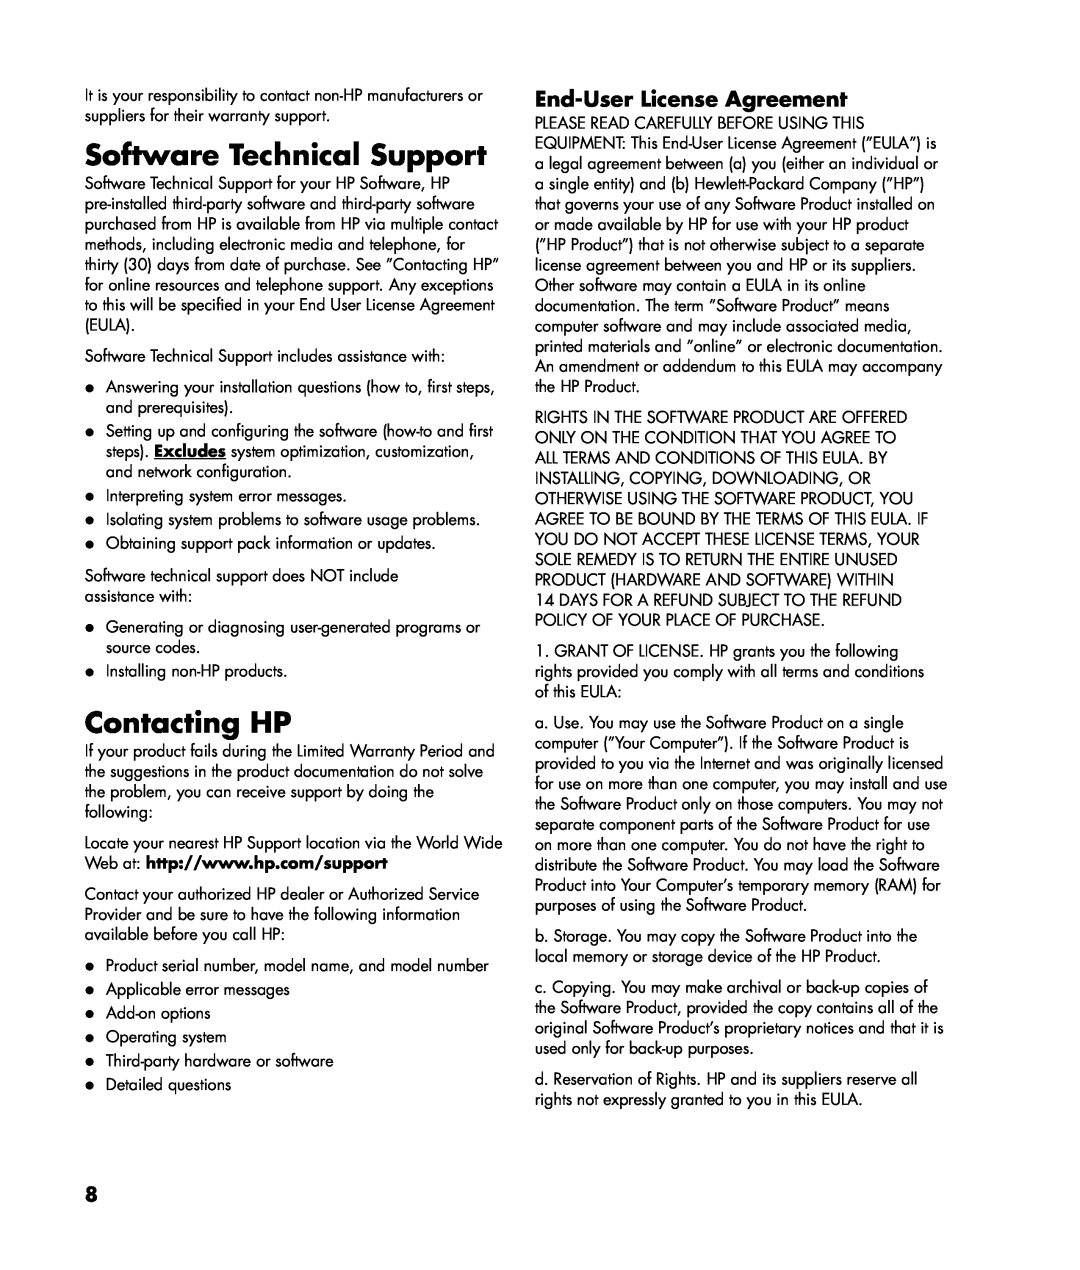 HP a1220in, a1260a, a1210in, m7260in, m7280in, m7288d Software Technical Support, Contacting HP, End-User License Agreement 